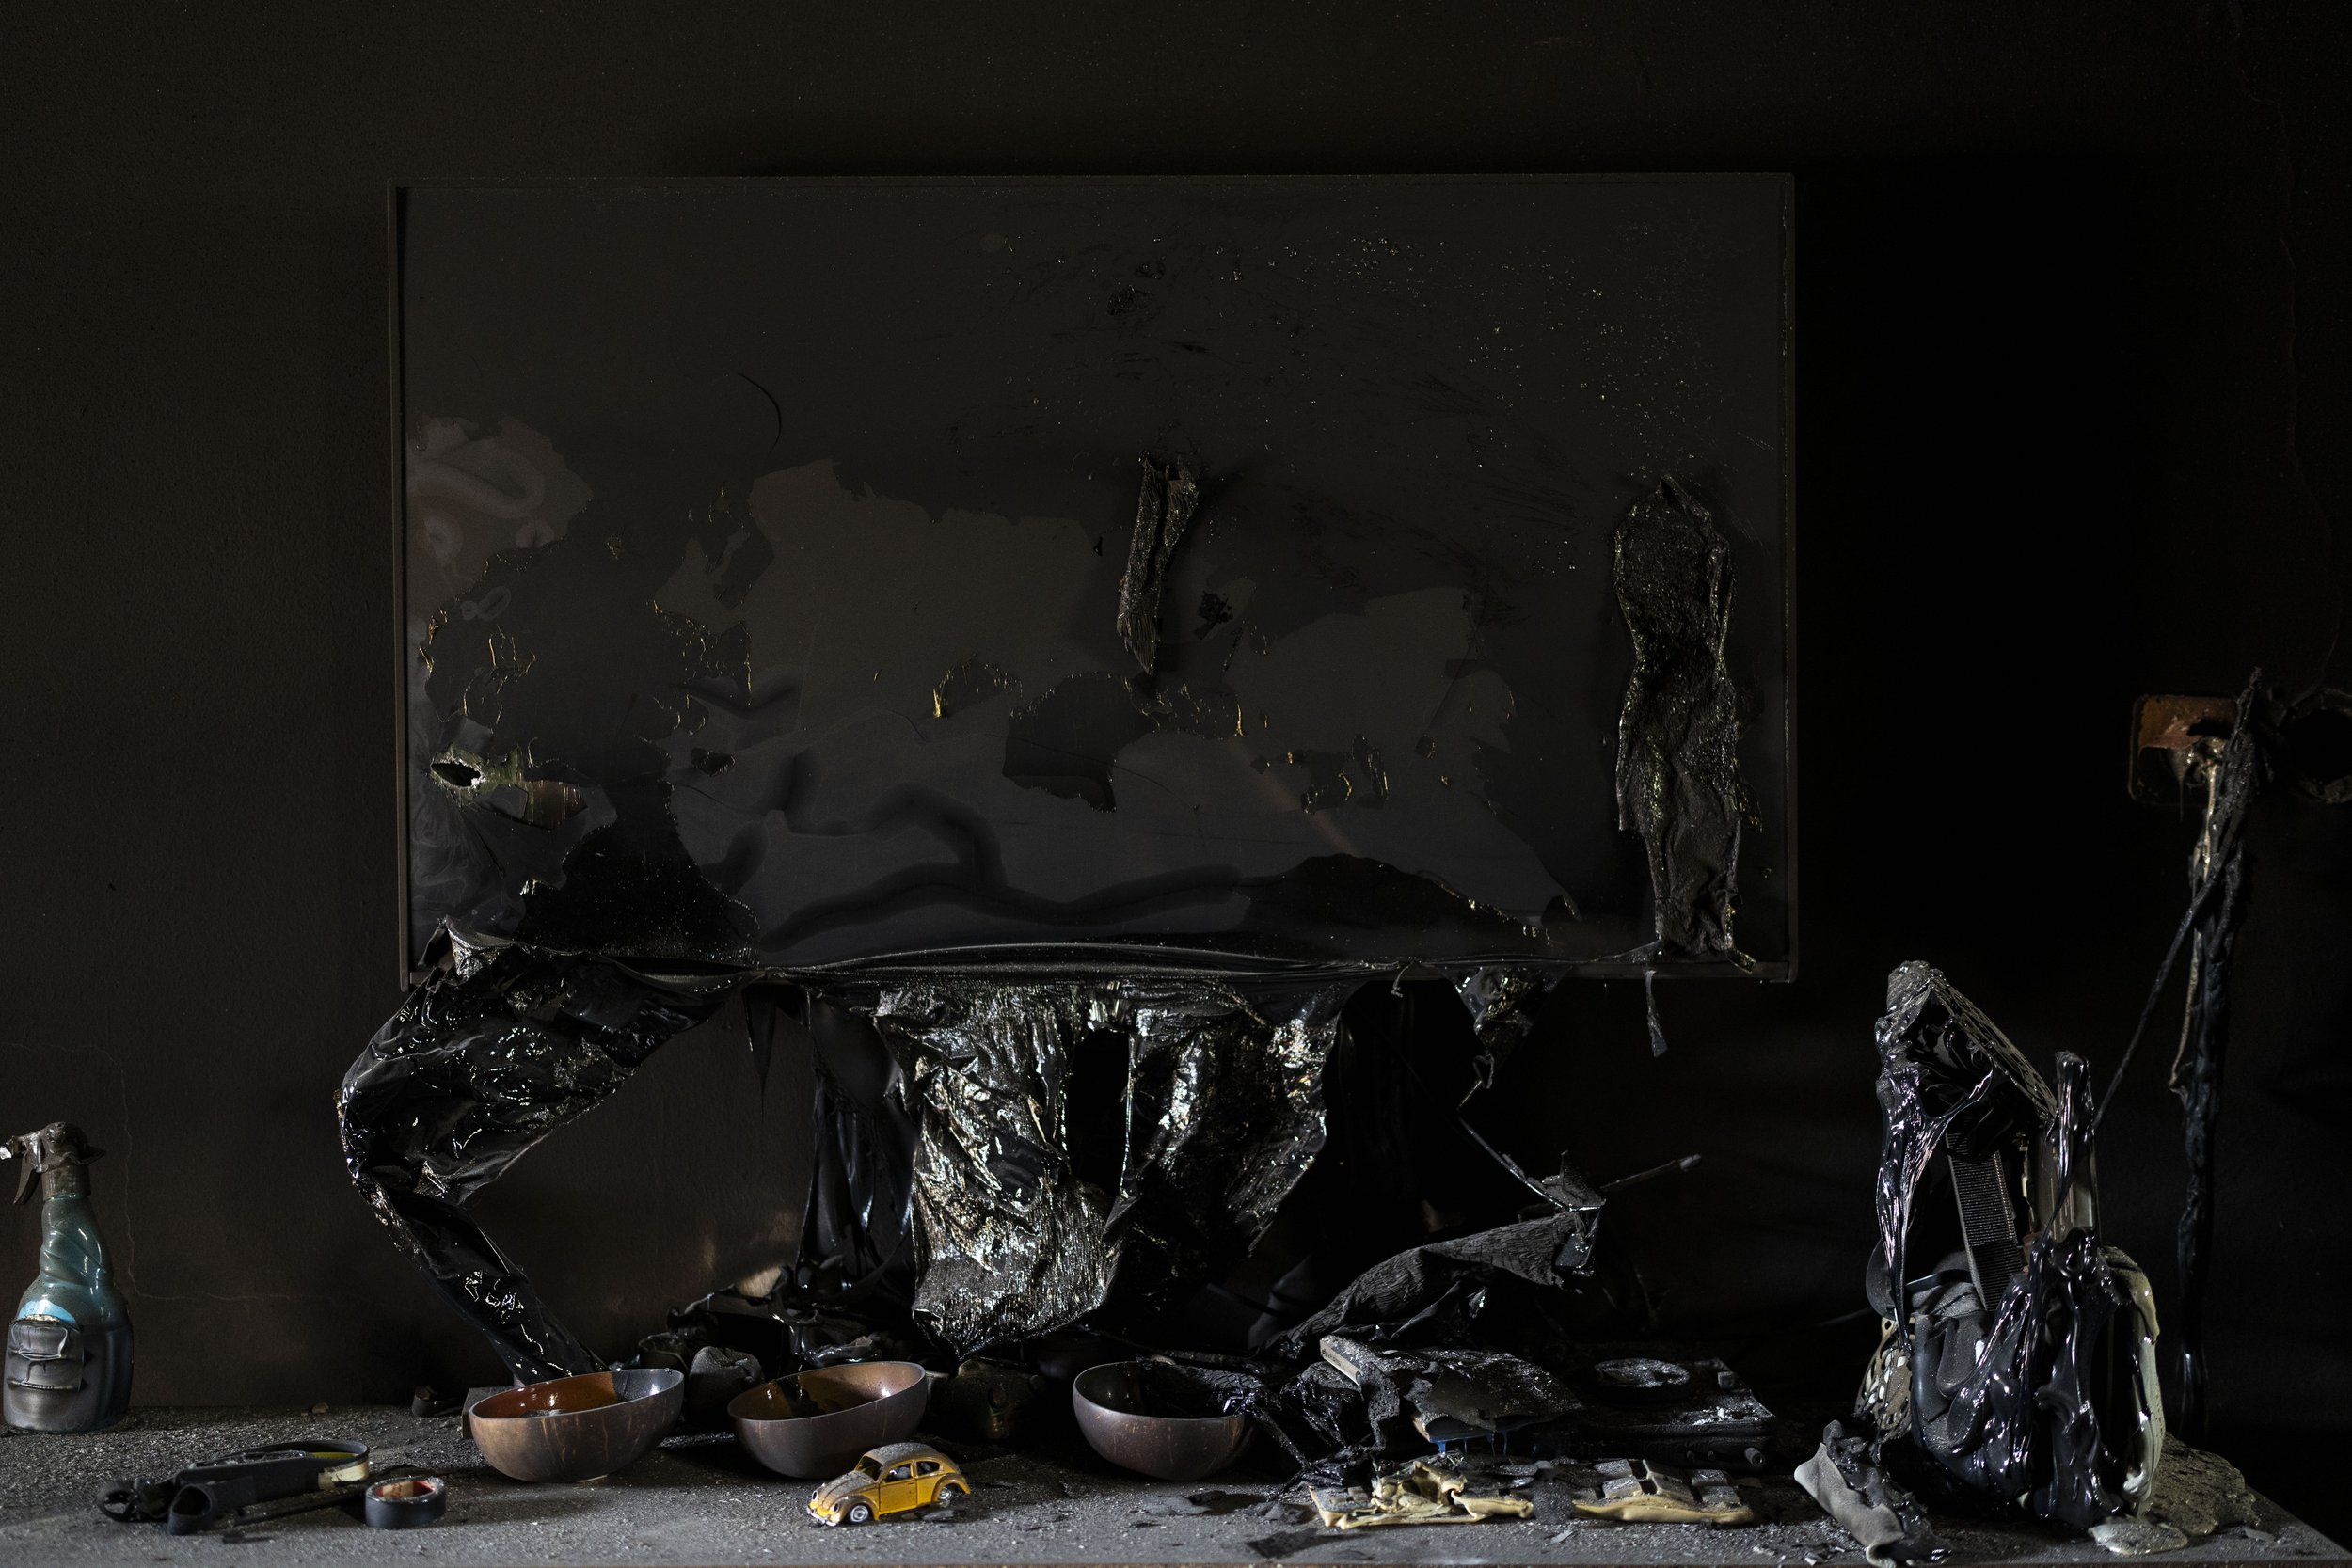  A melted television stands inside a burned out house in kibbutz Kfar Azza, Israel, near the Gaza Strip, on Nov. 7, 2023. The kibbutz was attacked on Oct. 7 by Hamas militants, who killed and kidnapped members of its community. (AP Photo/Bernat Arman